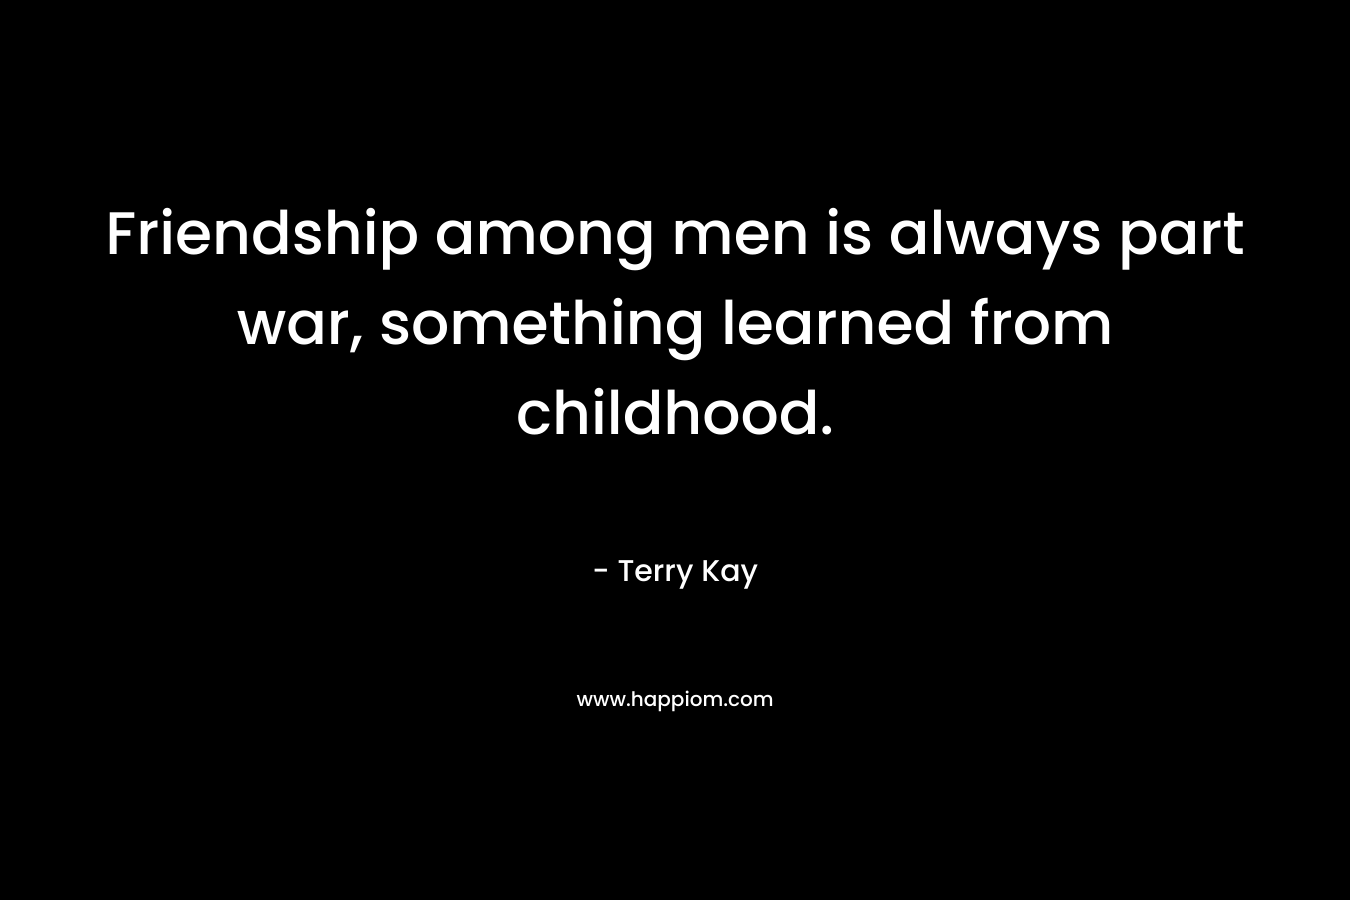 Friendship among men is always part war, something learned from childhood.